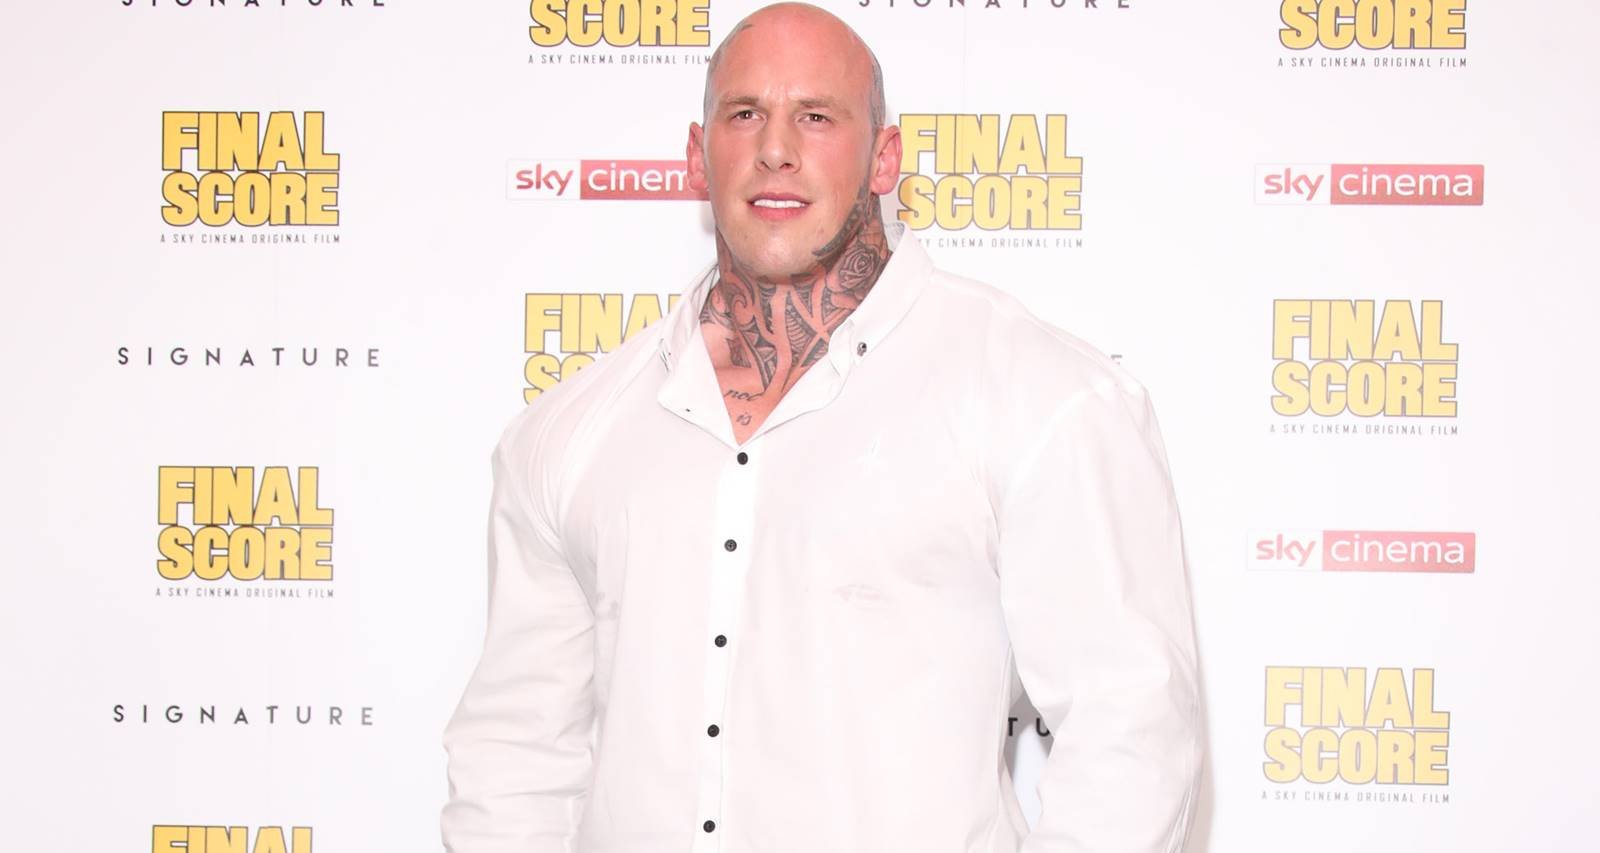 Martyn Ford Wiki, Age, Kids, Wife, Family, Early Life, Career, Movies & Facts About the MMA Bodybuilder in “Fast and Furious 9”